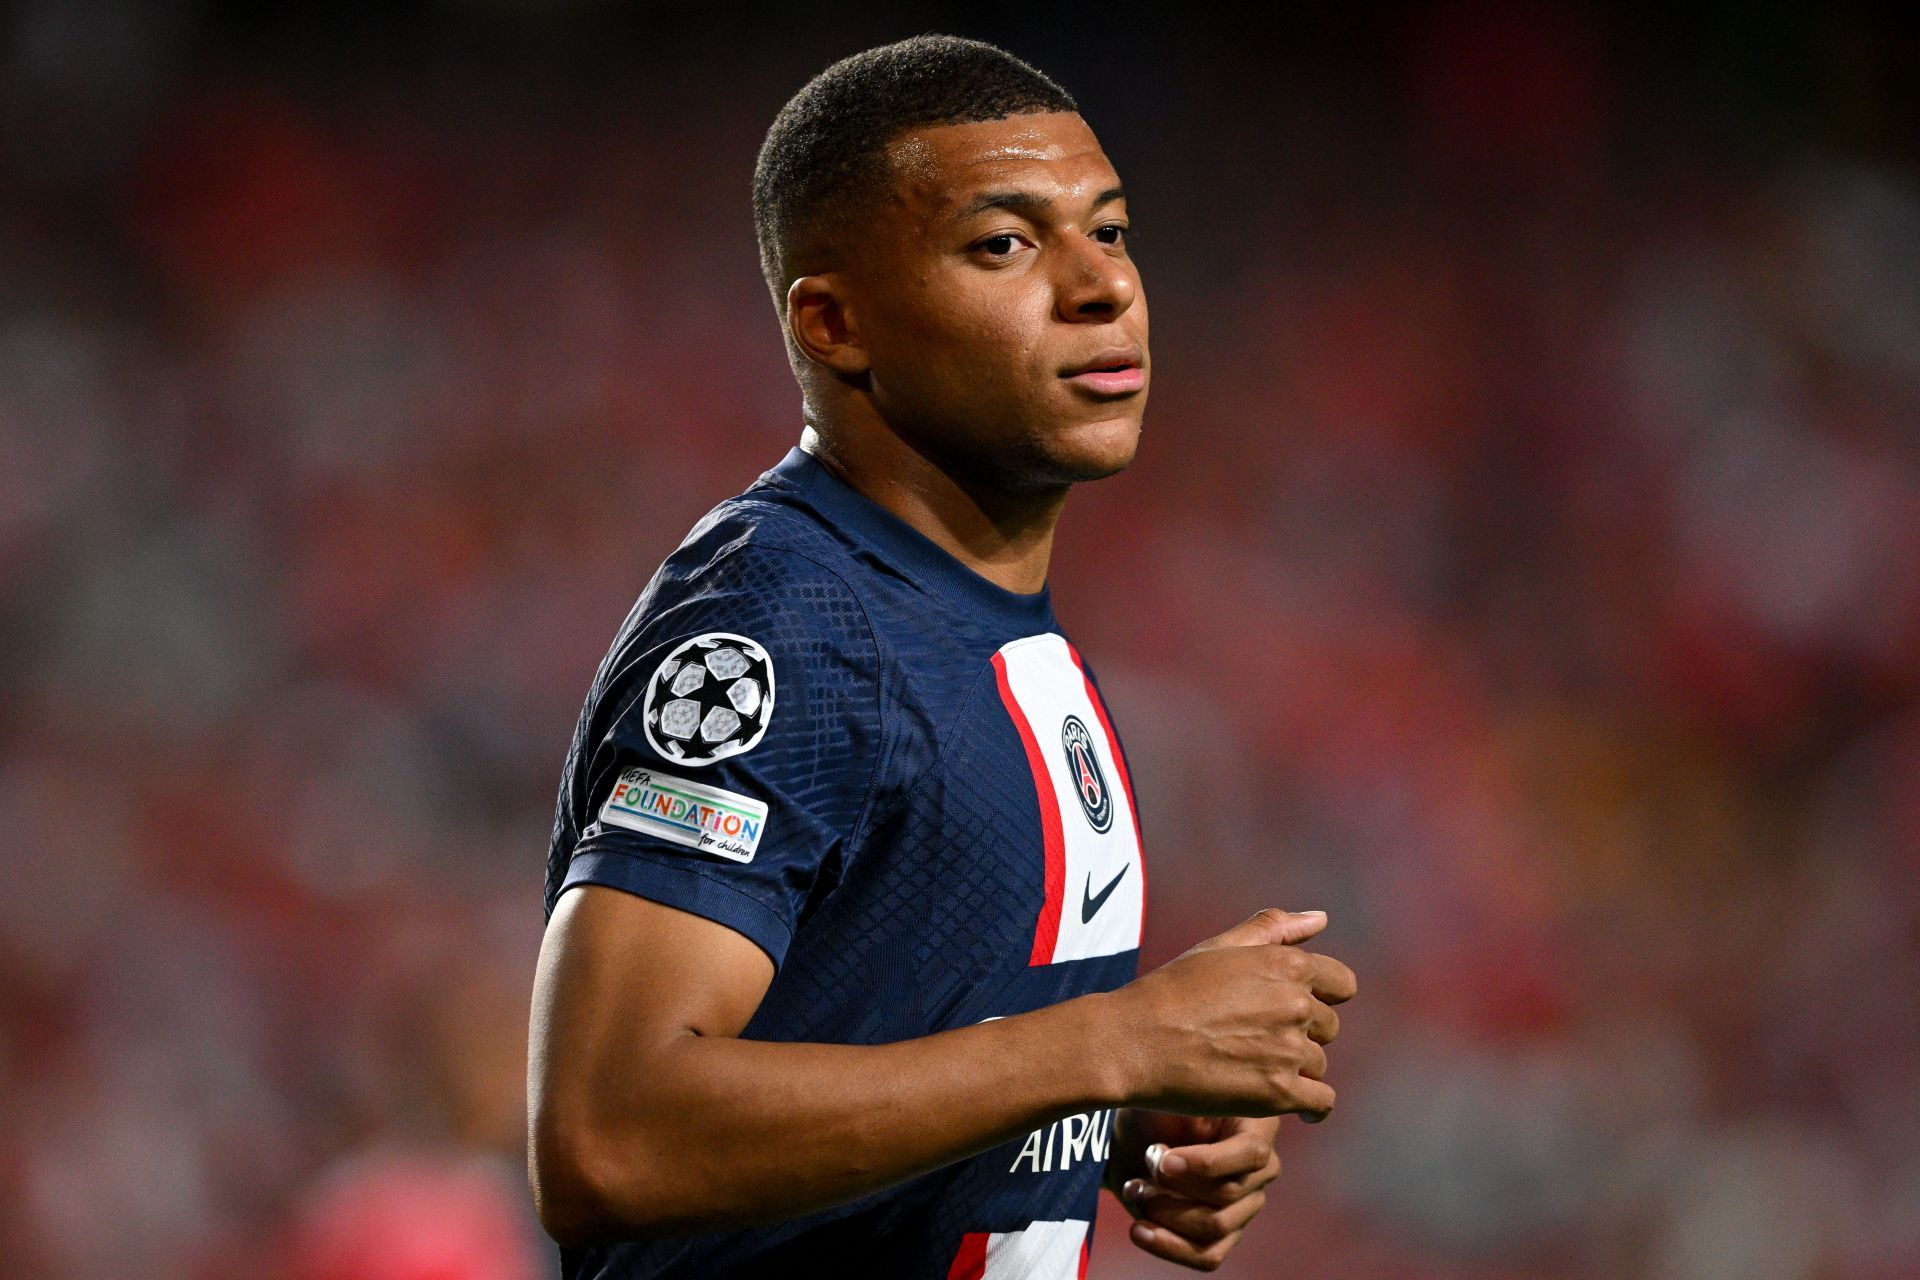 Real Madrid coach Carlo Ancelotti reacted to PSG superstar Kylian Mbappe speculation